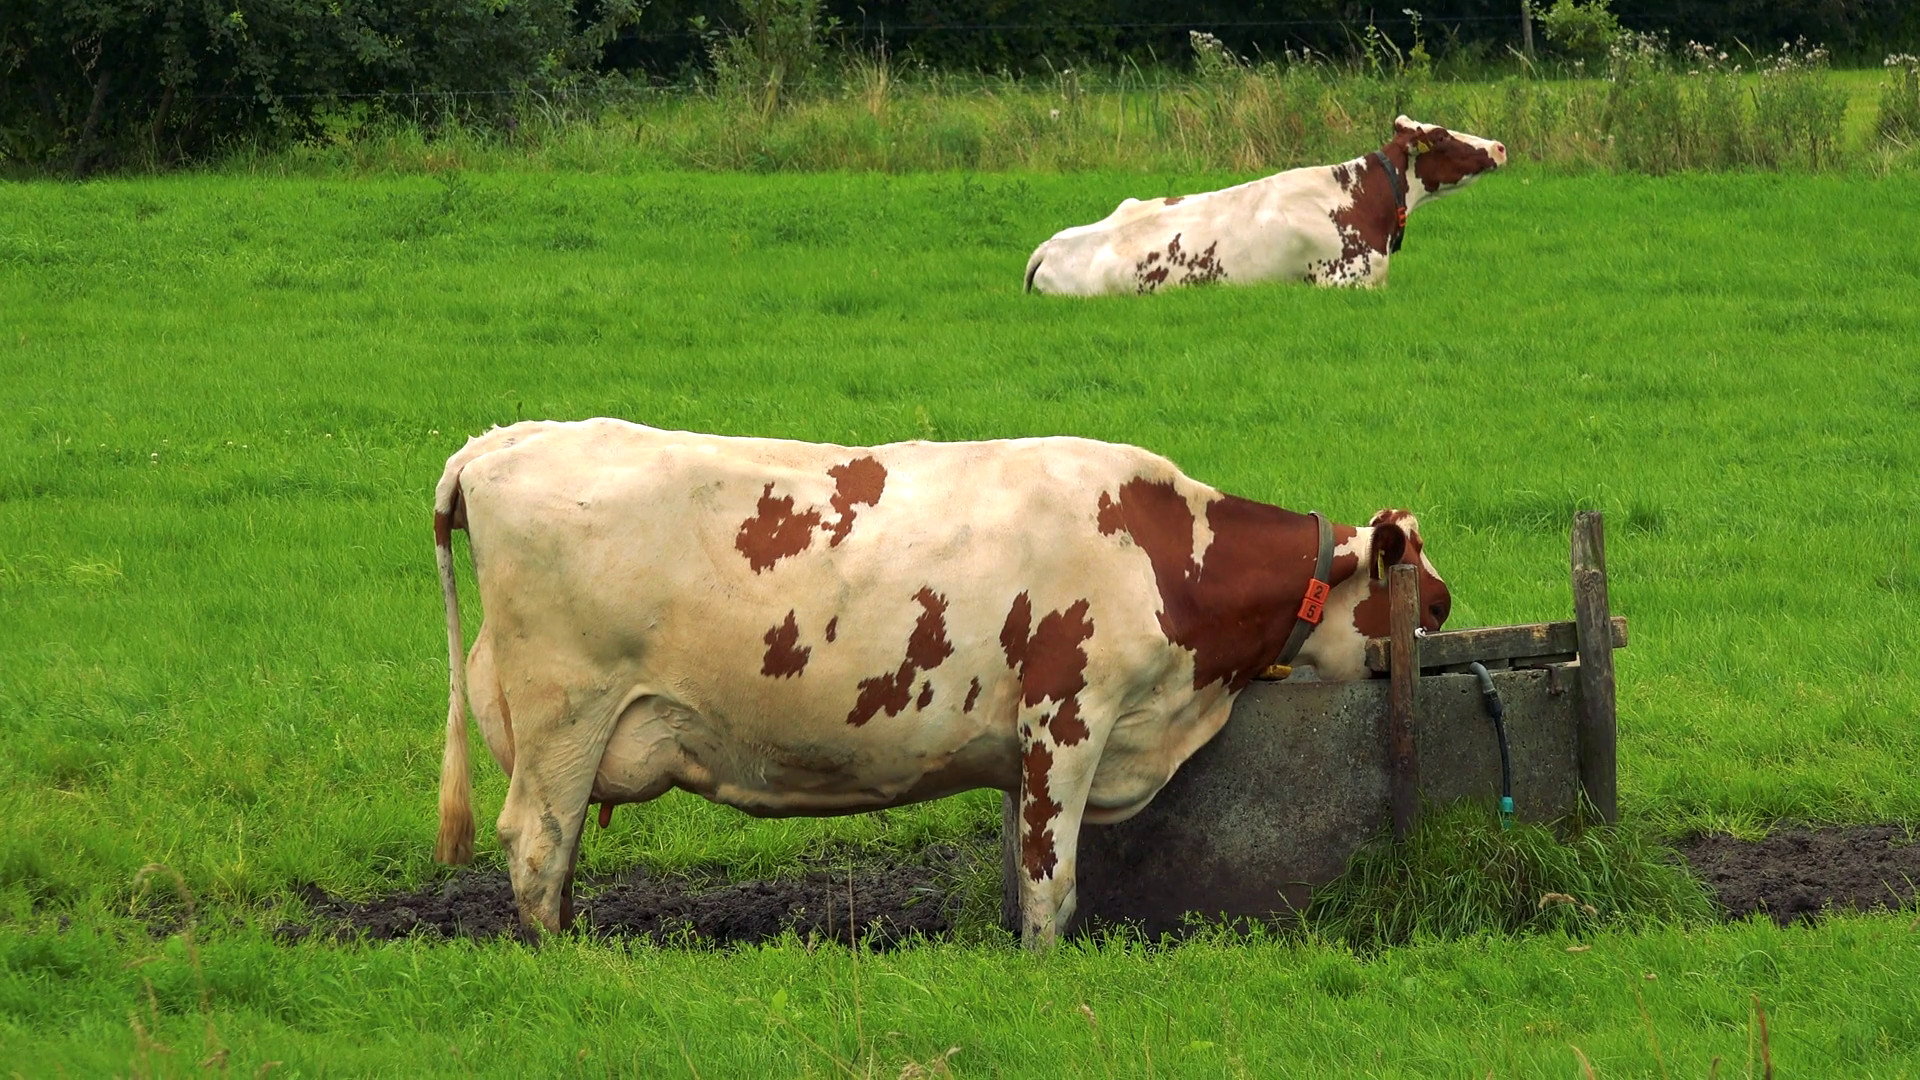 1920x1080 A brown and white cow drinks from a water trough in a pasture, another cow